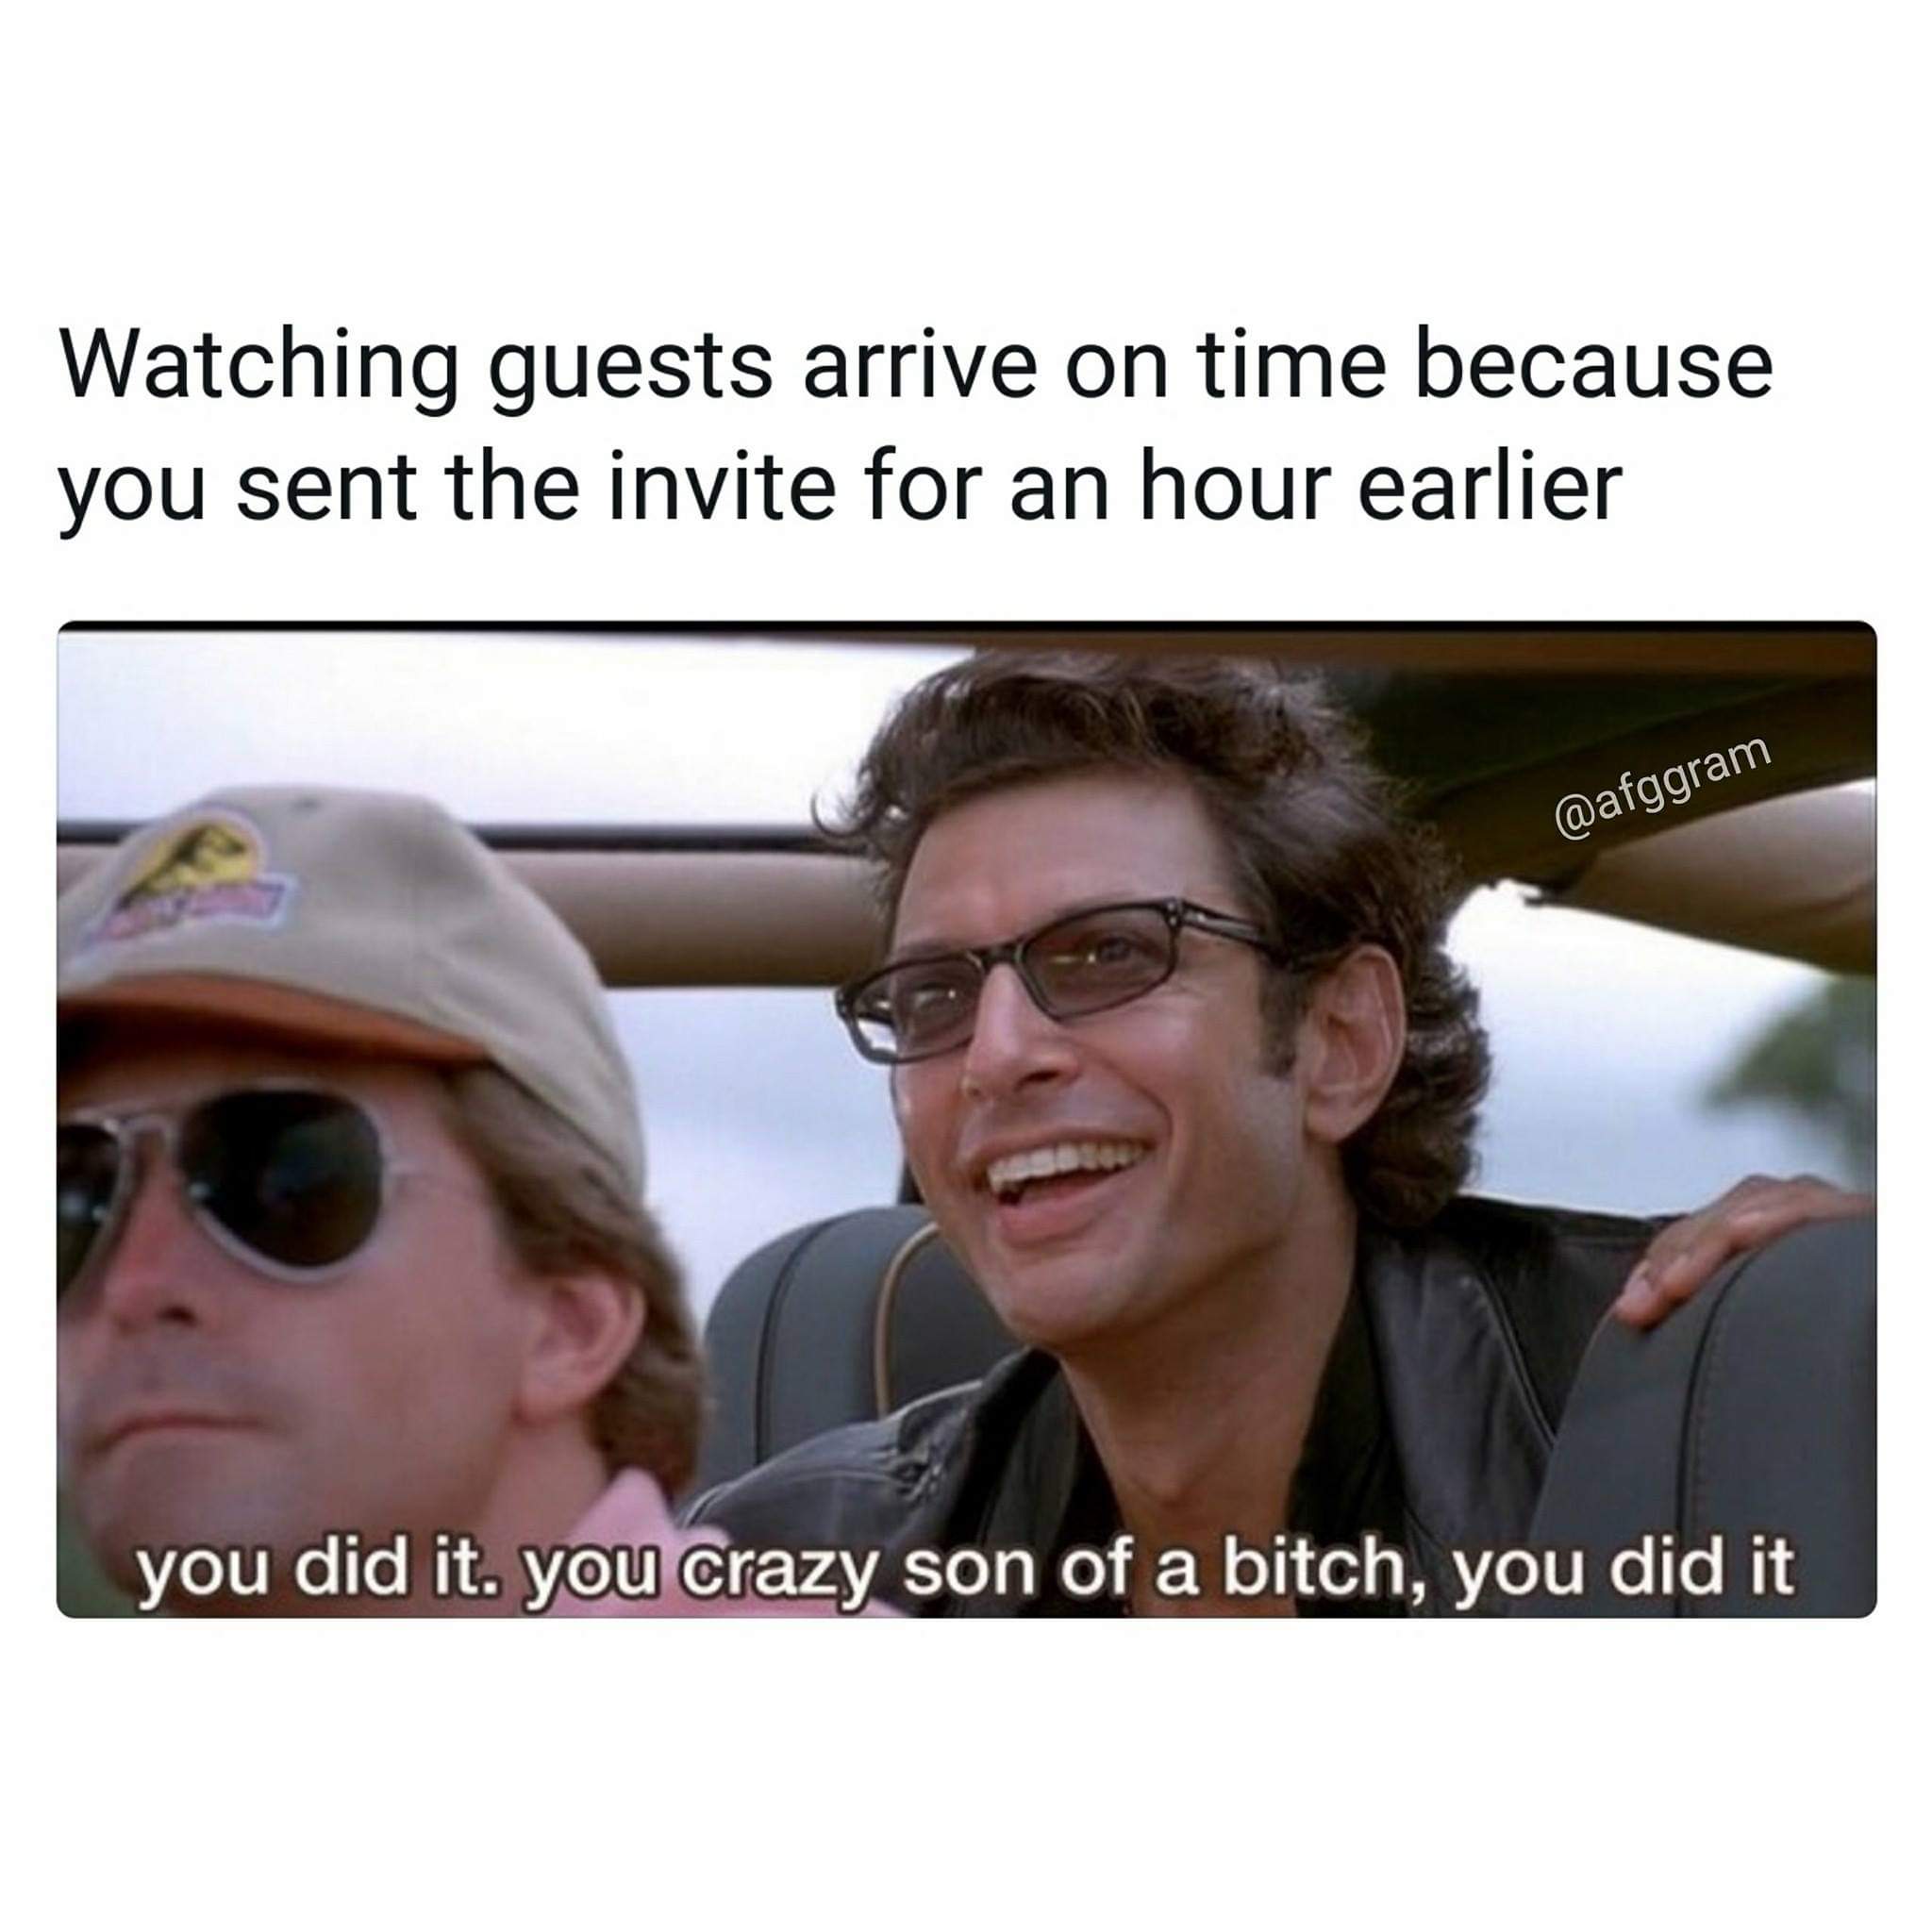 jeff goldblum uber meme - Watching guests arrive on time because you sent the invite for an hour earlier you did it. you crazy son of a bitch, you did it